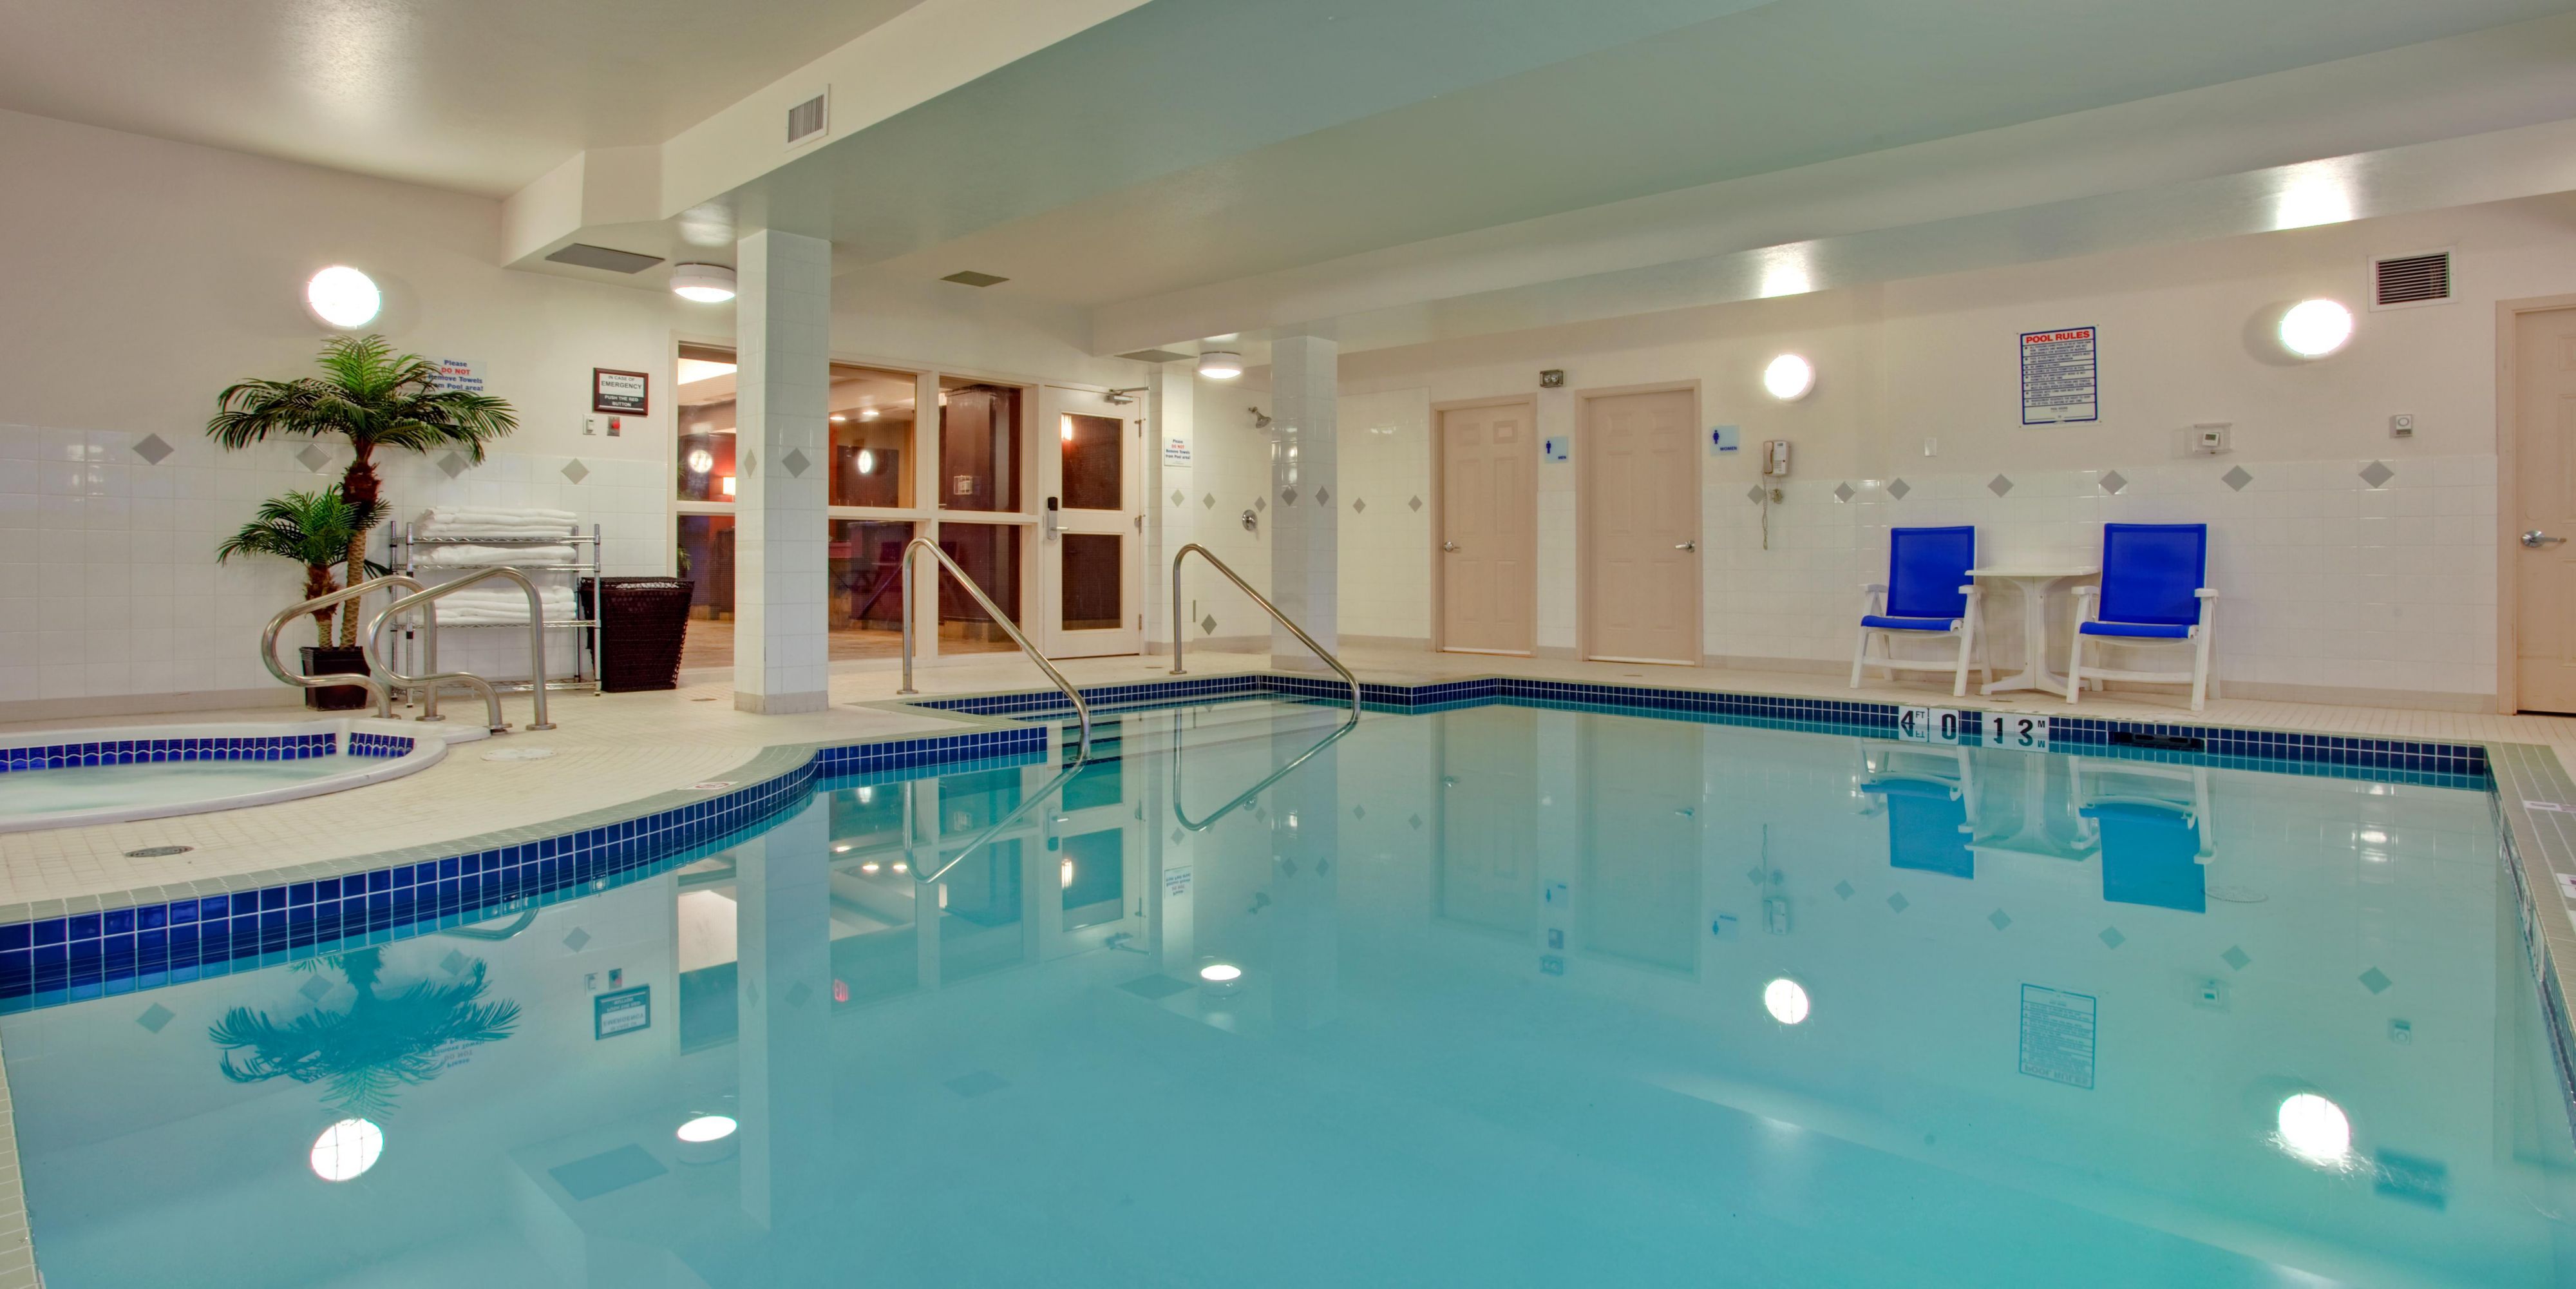 Fun for the entire family!  Enjoy our heated, indoor pool & hot tub during your next stay.